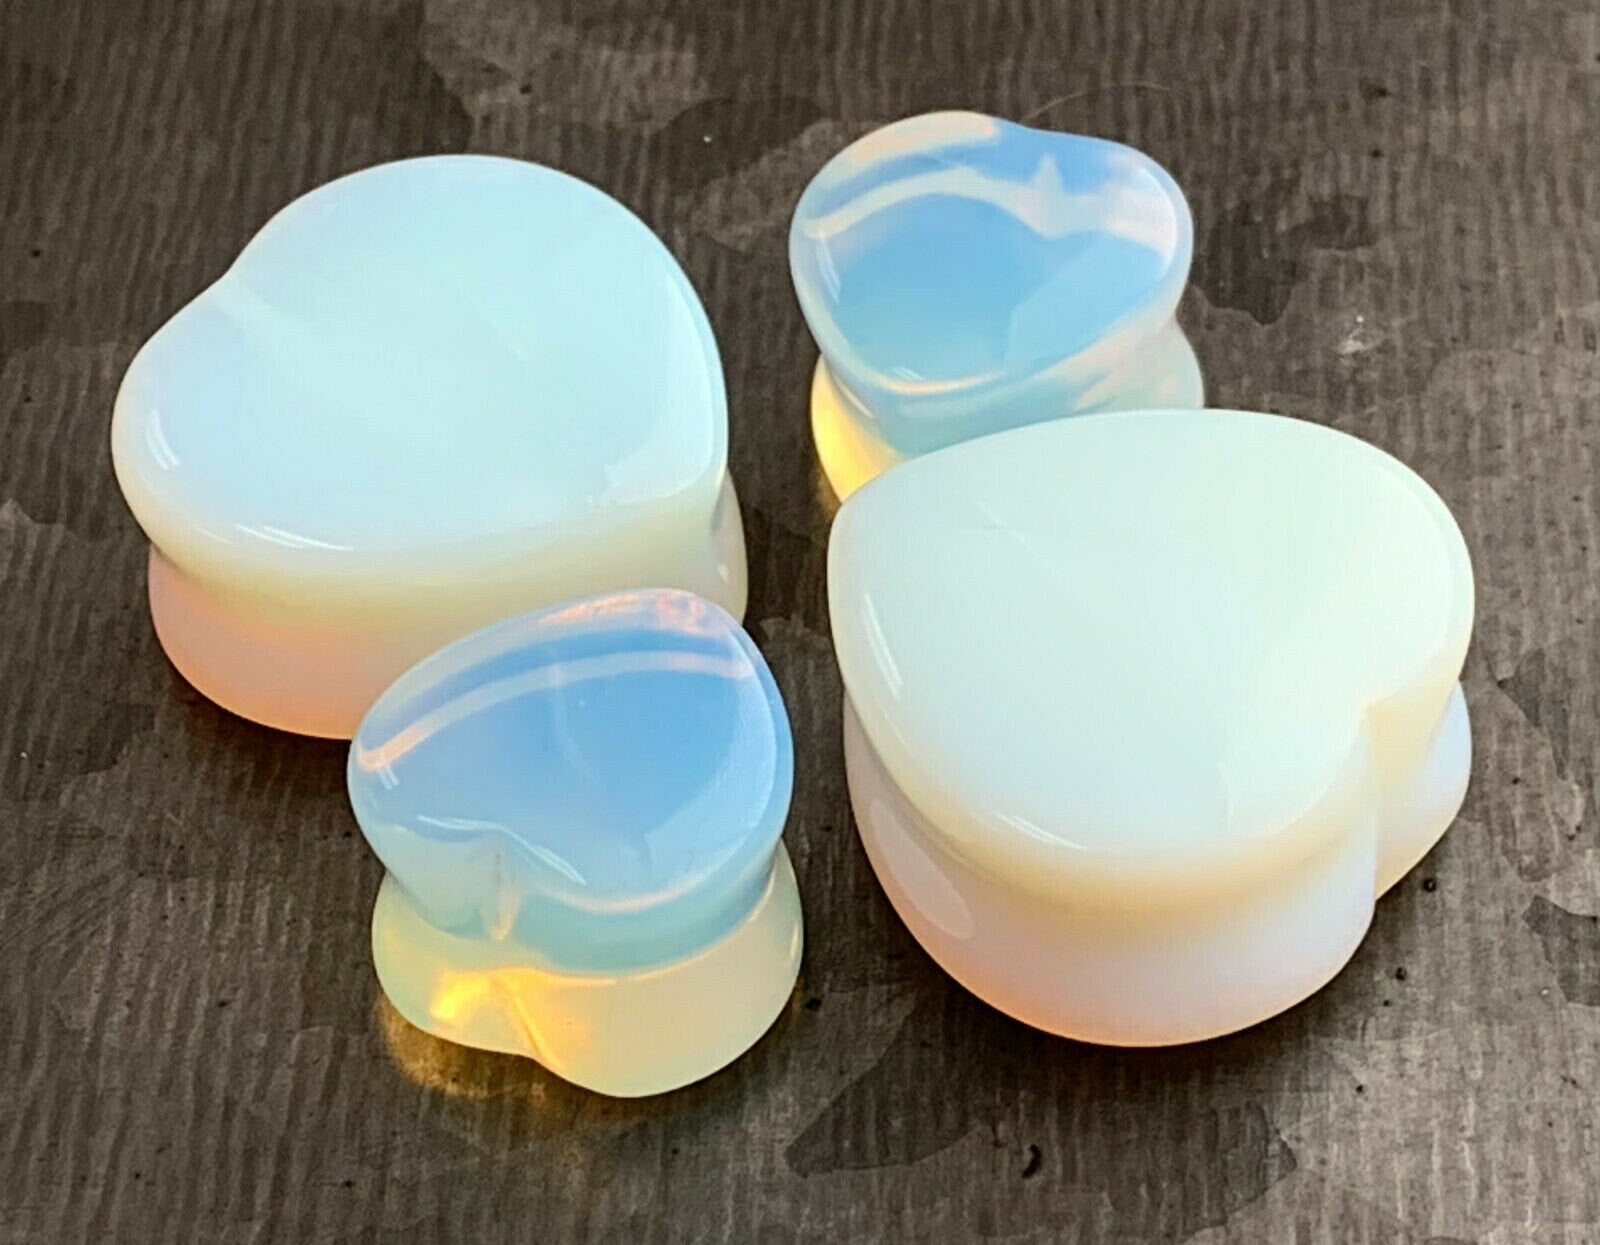 PAIR of Brilliant Opalite Opalescent Heart Double Flare Stone Plugs - Gauges 2g (6mm) thru 1" (25mm) available!